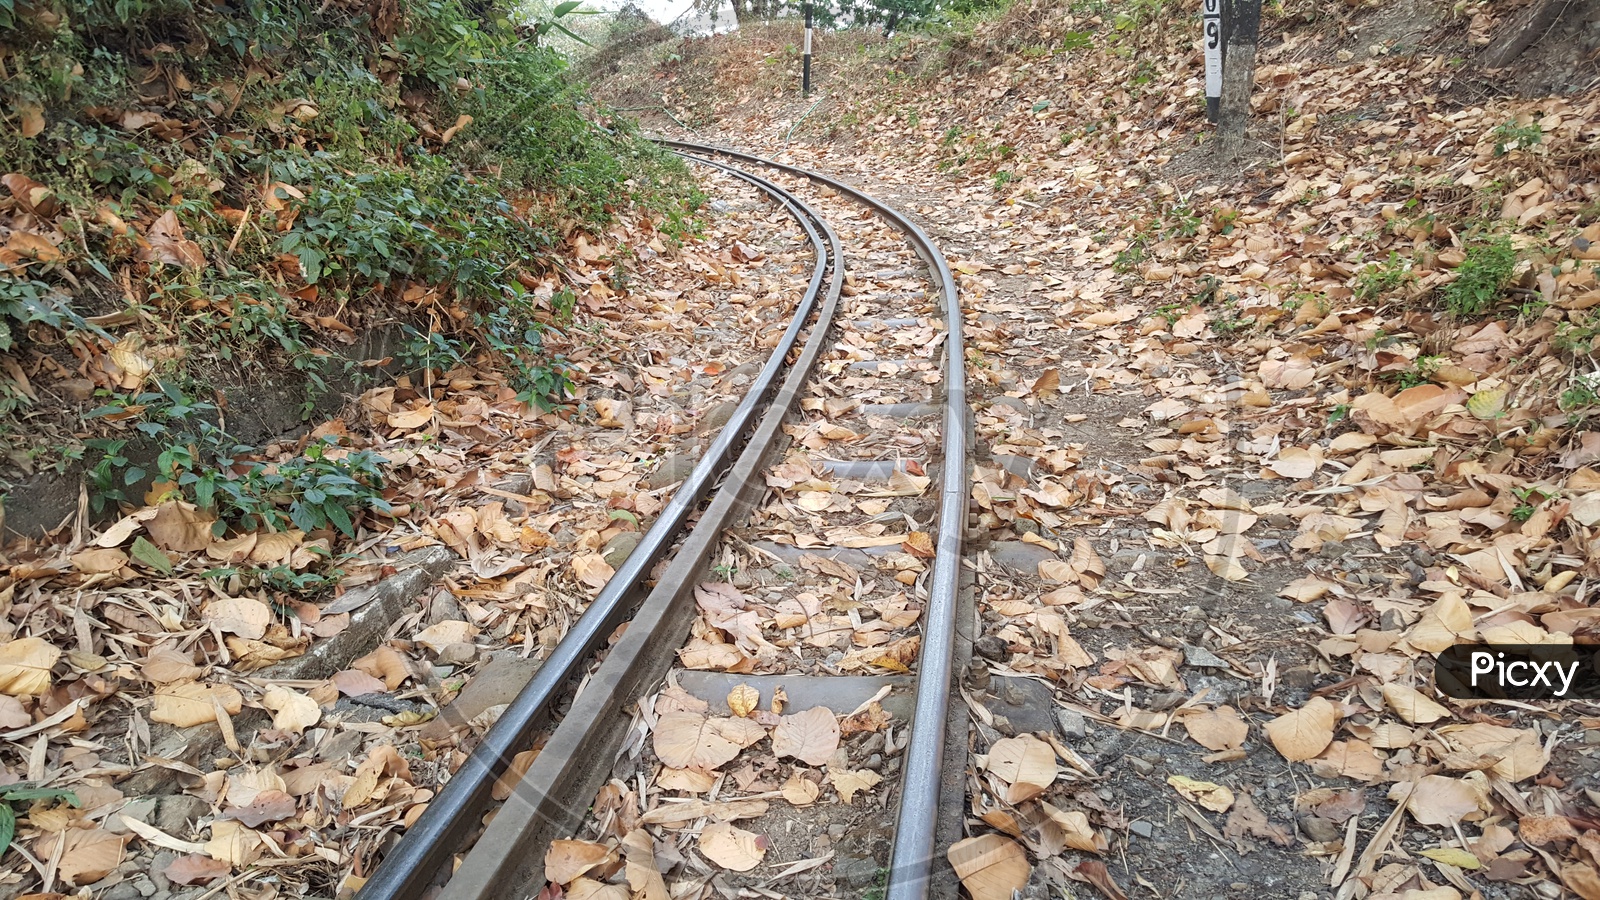 The narrow gauge tracks bends throught the forest